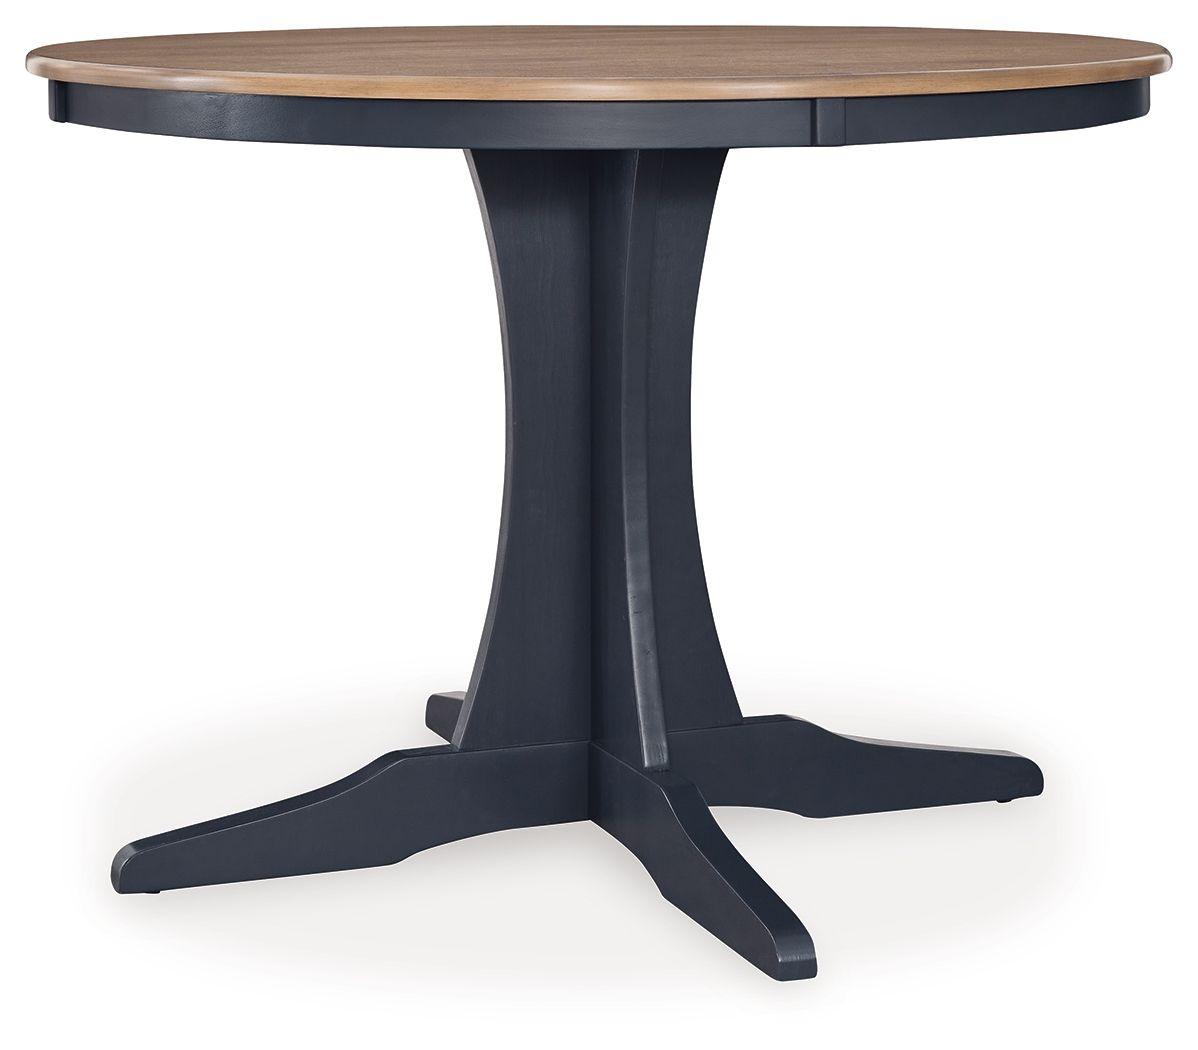 Signature Design by Ashley® - Landocken - Brown / Blue - Round Dining Room Table - 5th Avenue Furniture